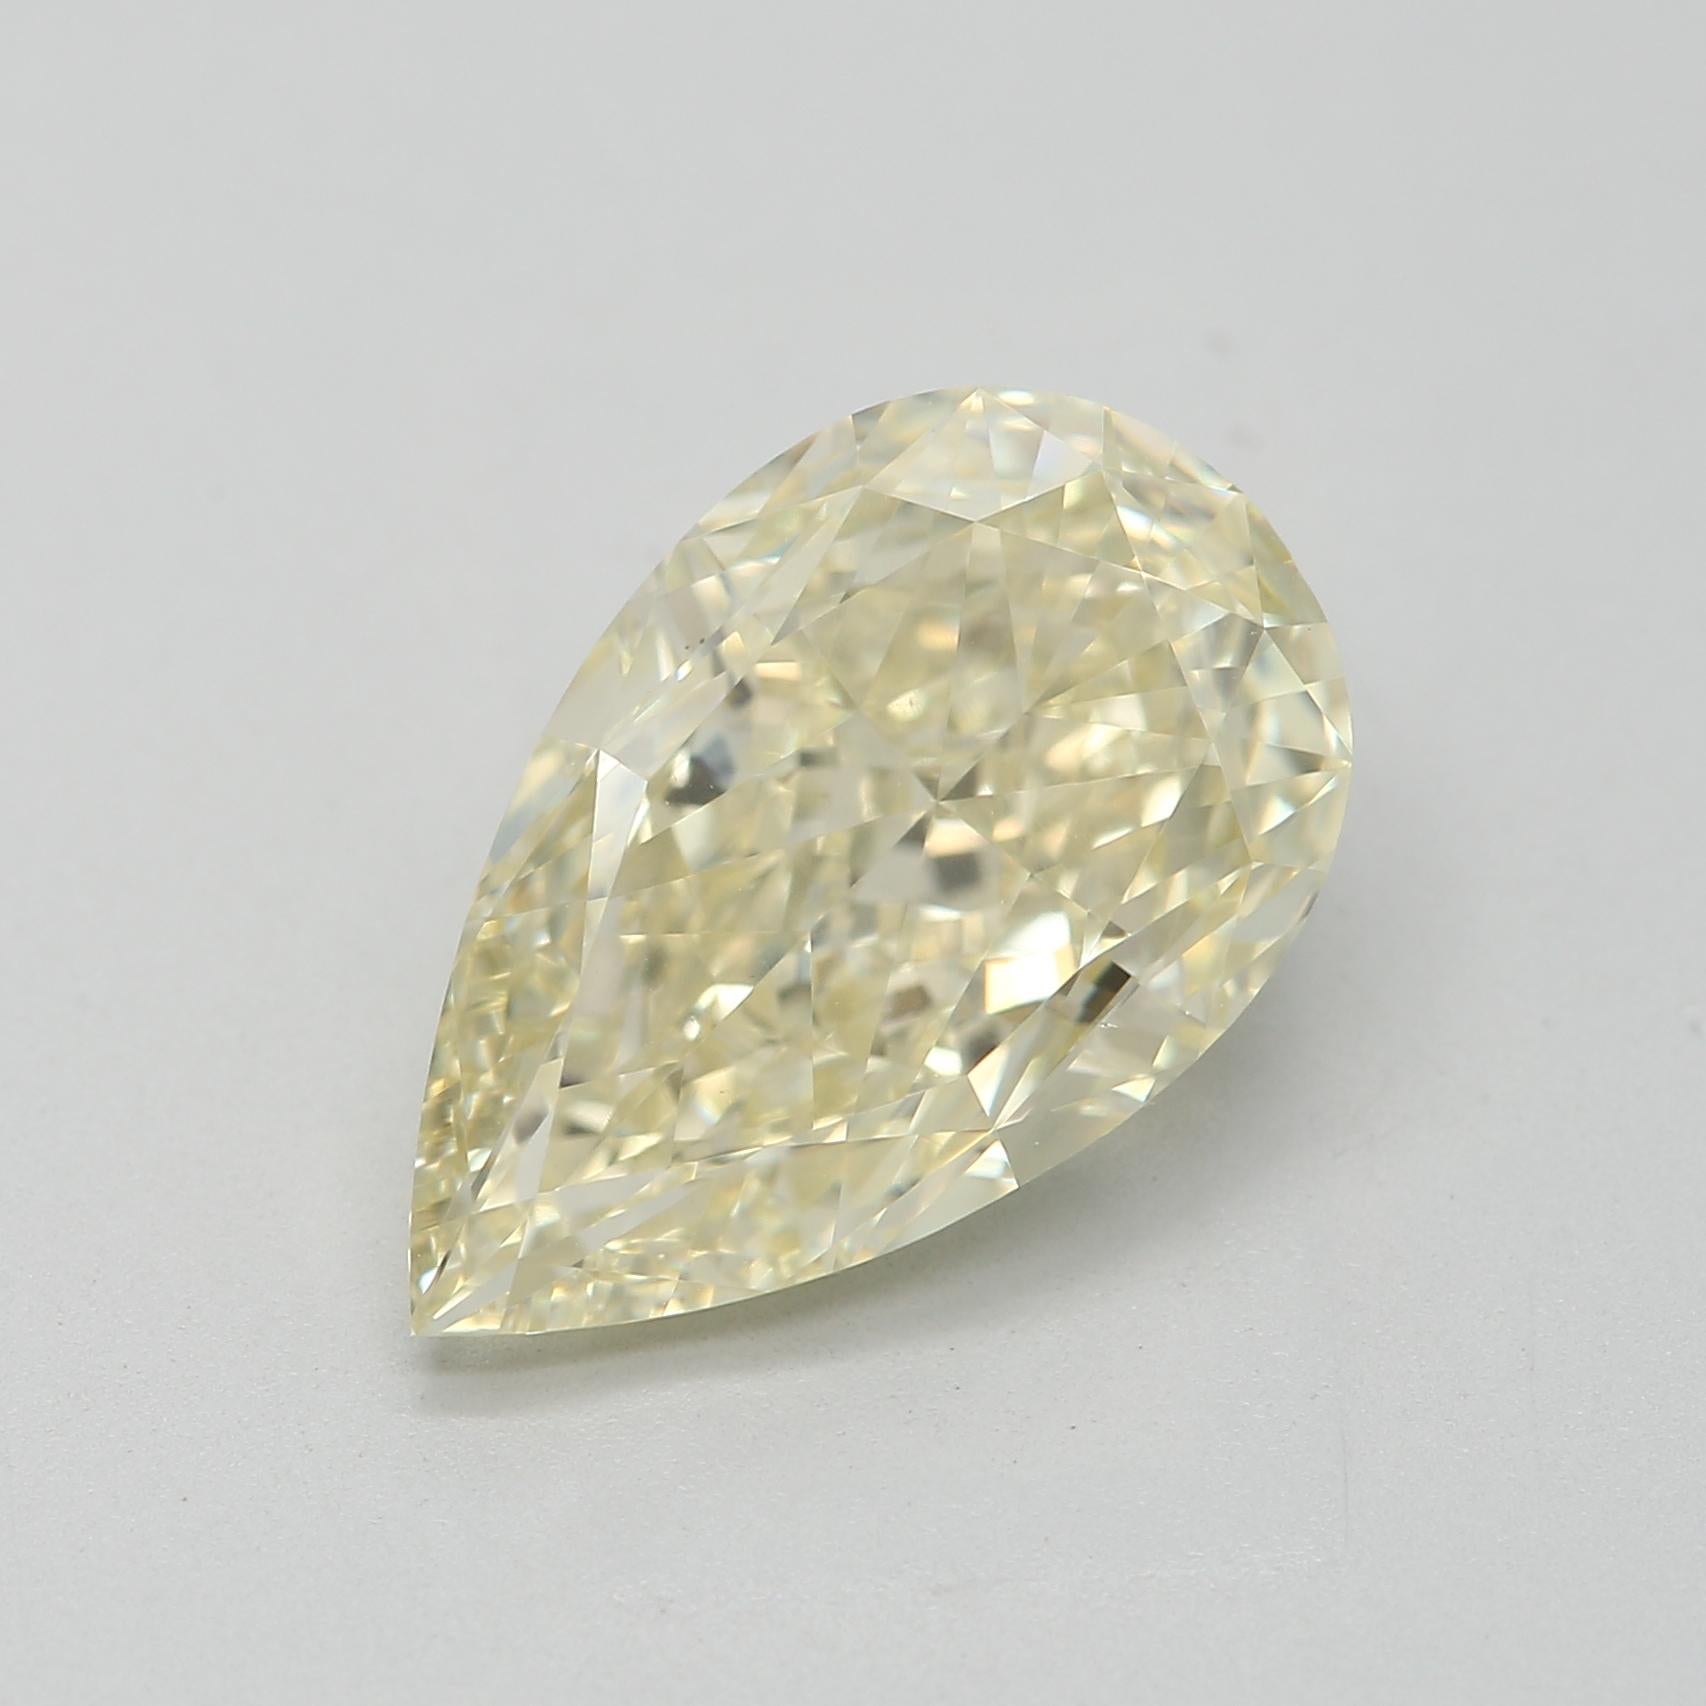 *100% NATURAL FANCY COLOUR DIAMOND*

✪ Diamond Details ✪

➛ Shape: Pear
➛ Colour Grade: Fancy Light Yellow 
➛ Carat: 3.19
➛ Clarity: VS1
➛ GIA Certified 

^FEATURES OF THE DIAMOND^

This pear-shaped diamond is a unique and elegant choice for an